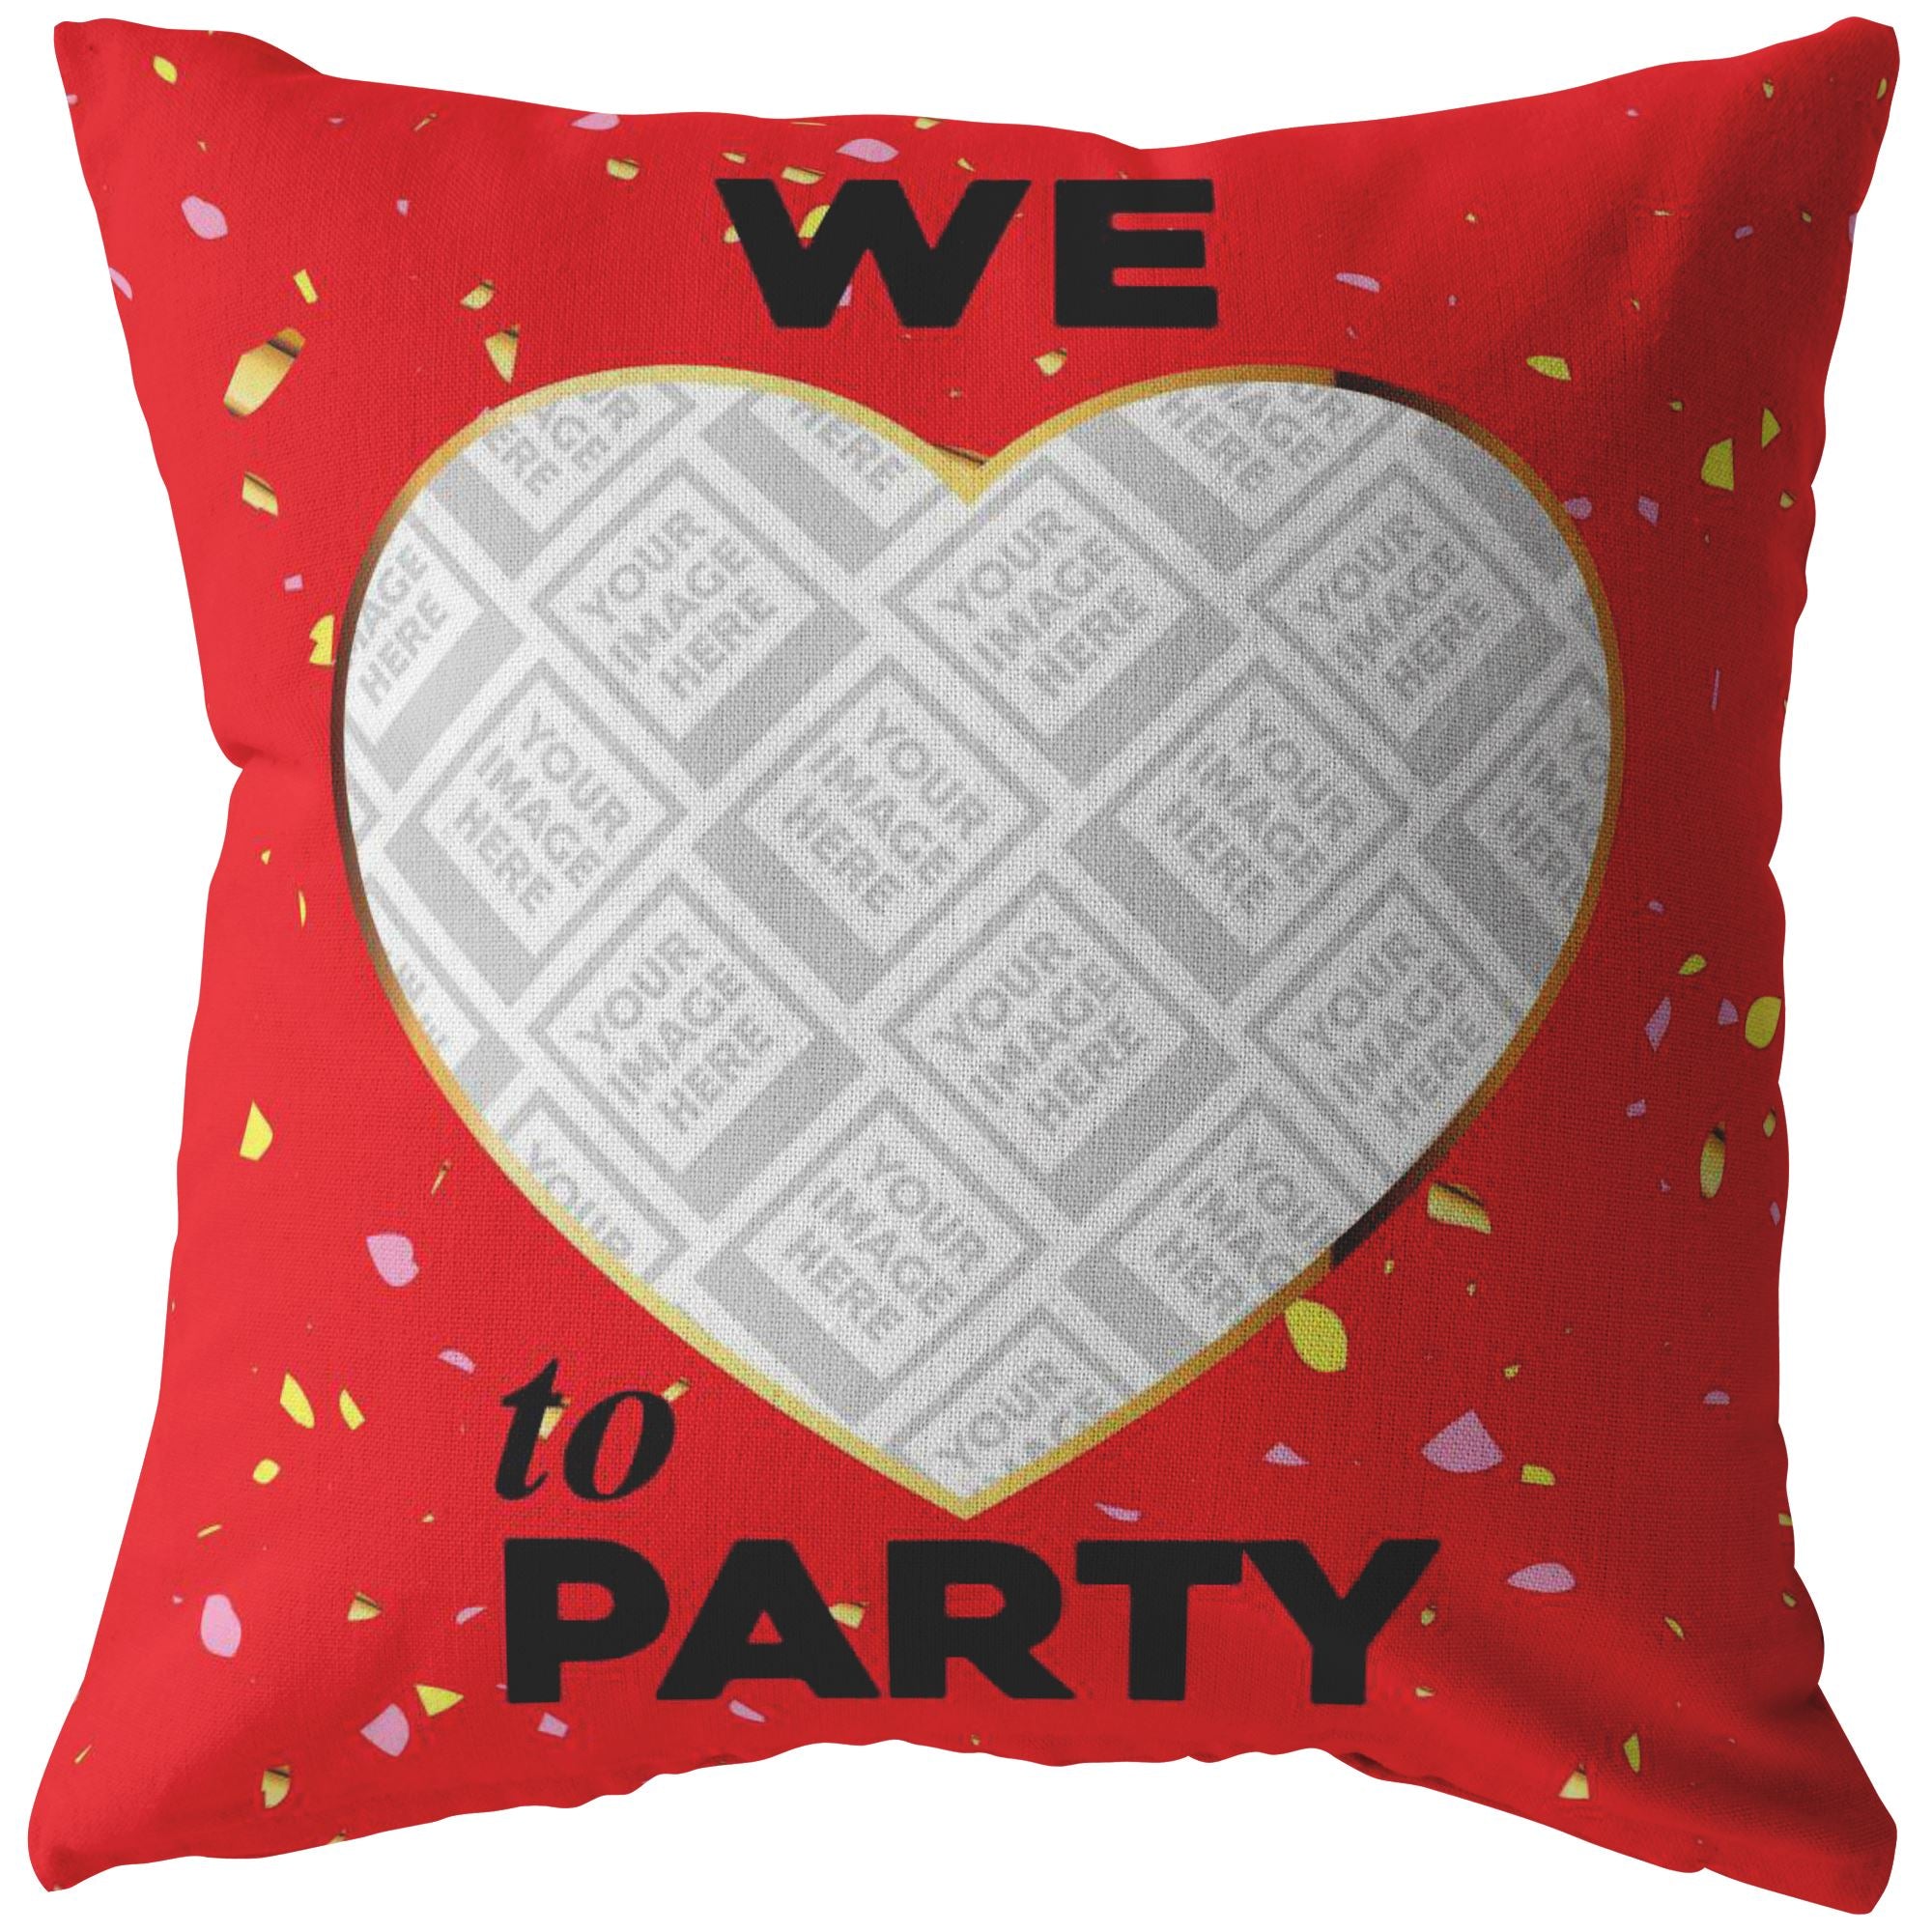 Personalized Pillow | We Love To Party | Upload Your Own Picture! - Houseboat Kings